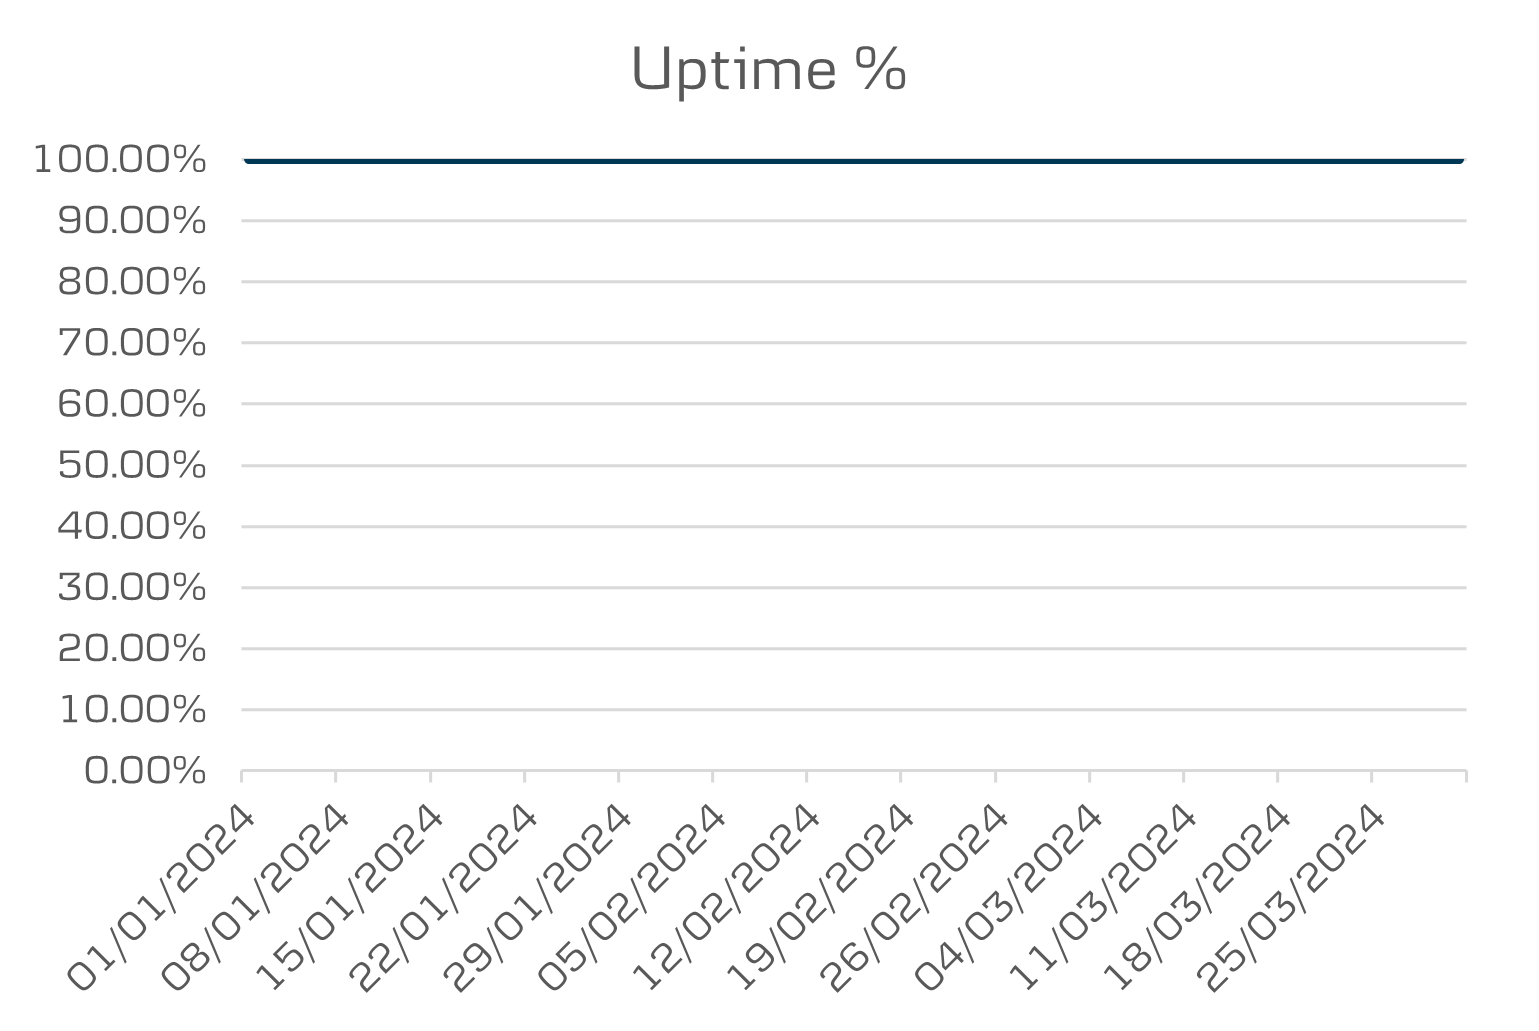 Mobile business and tablet uptime